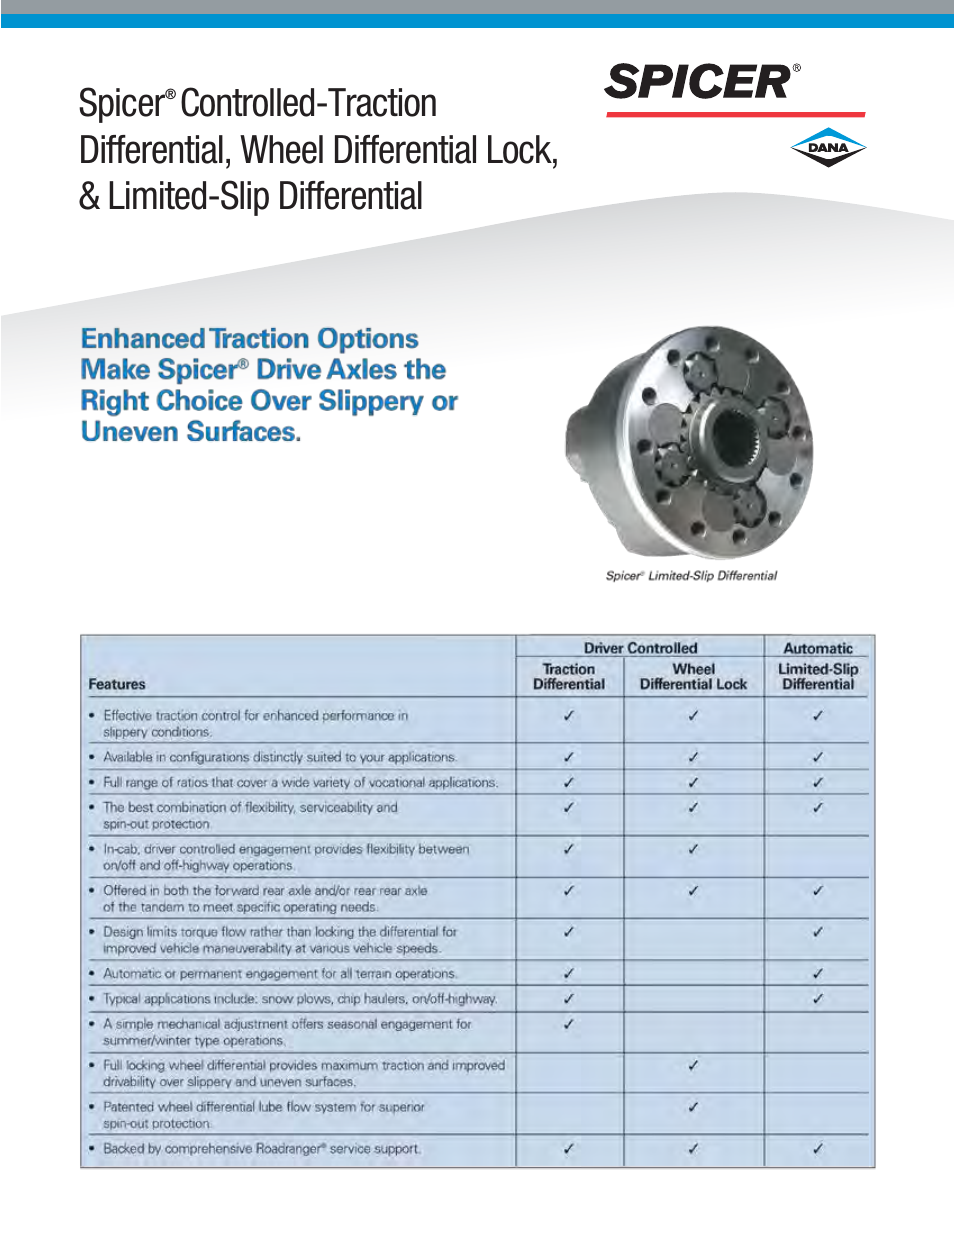 Controlled-Traction Differential, Wheel Differential Lock, Limited-Slip Differential